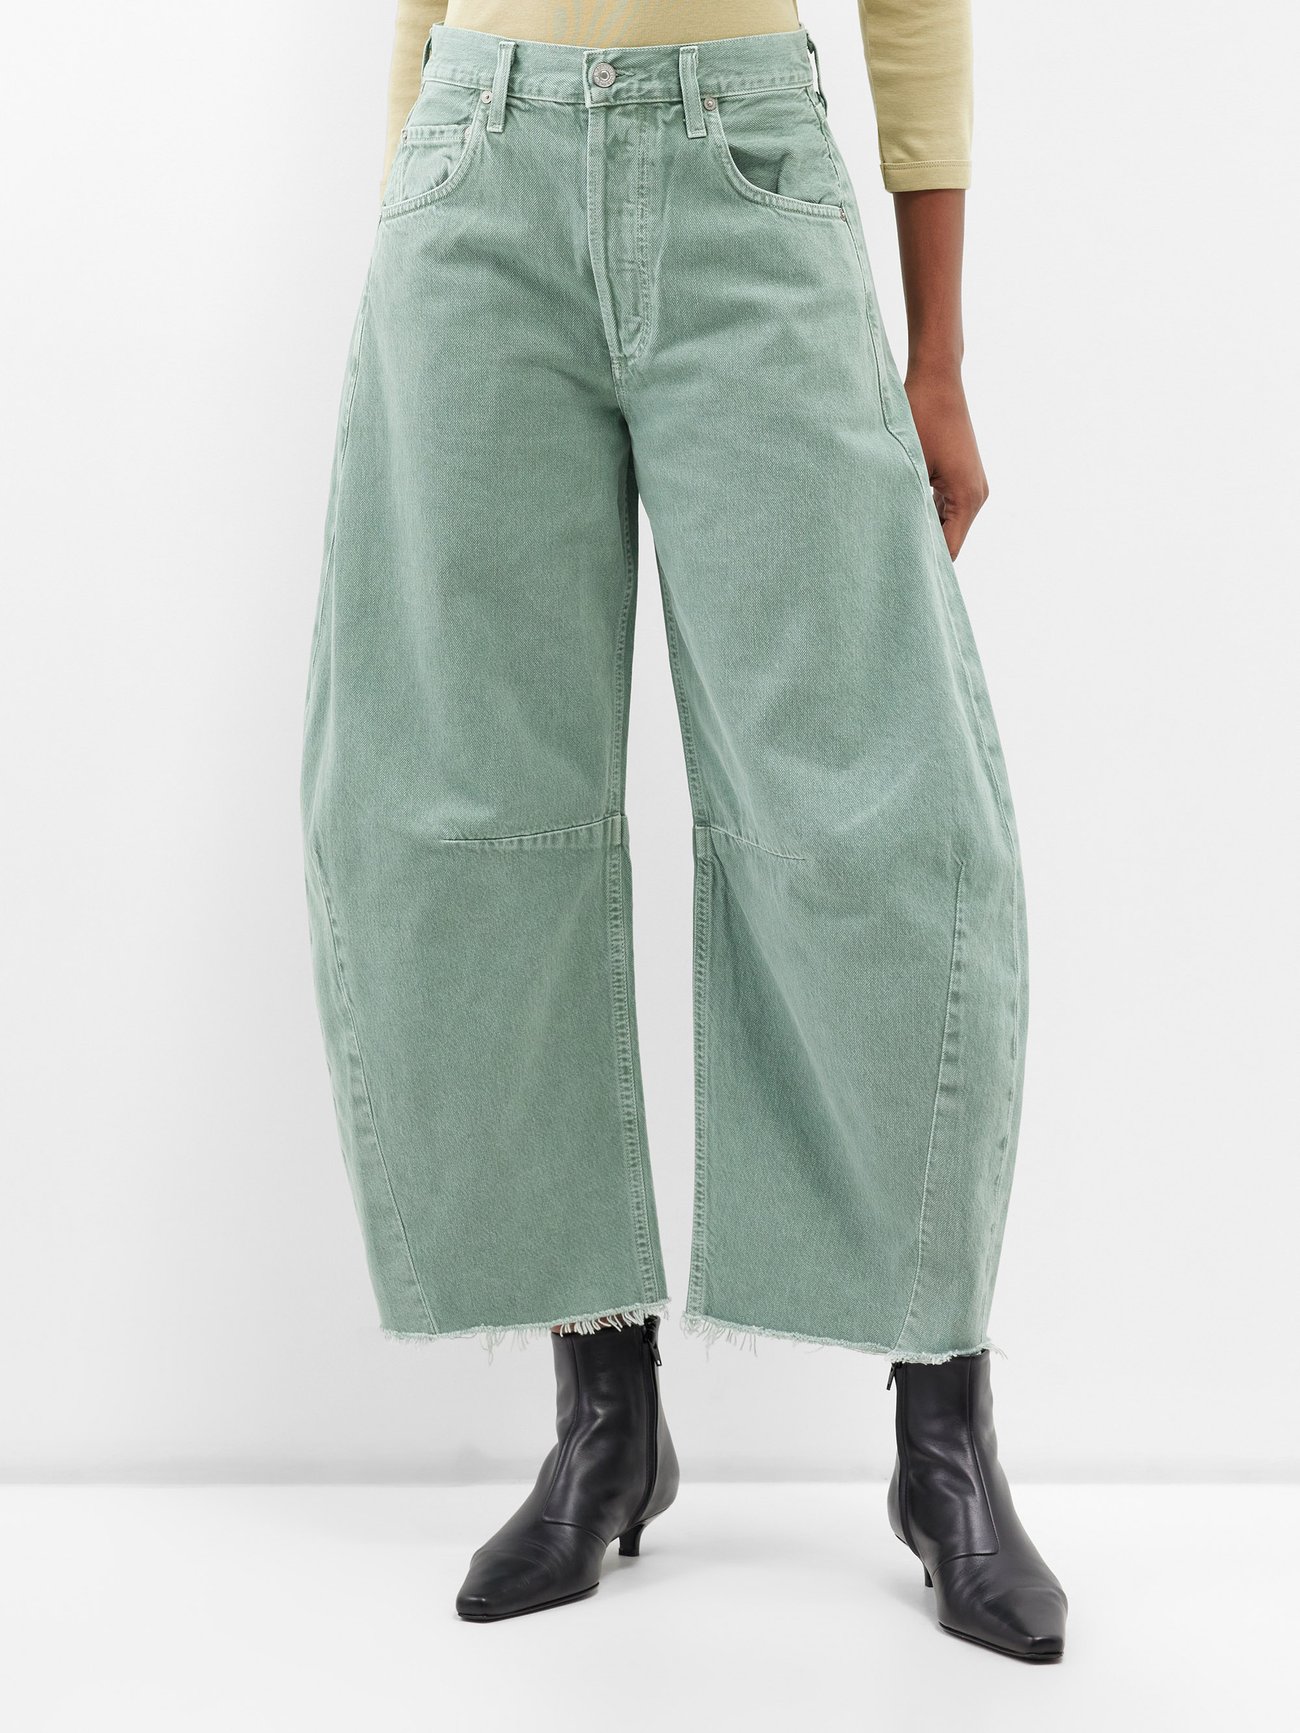 Green Horseshoe wide-leg jeans | Citizens of Humanity